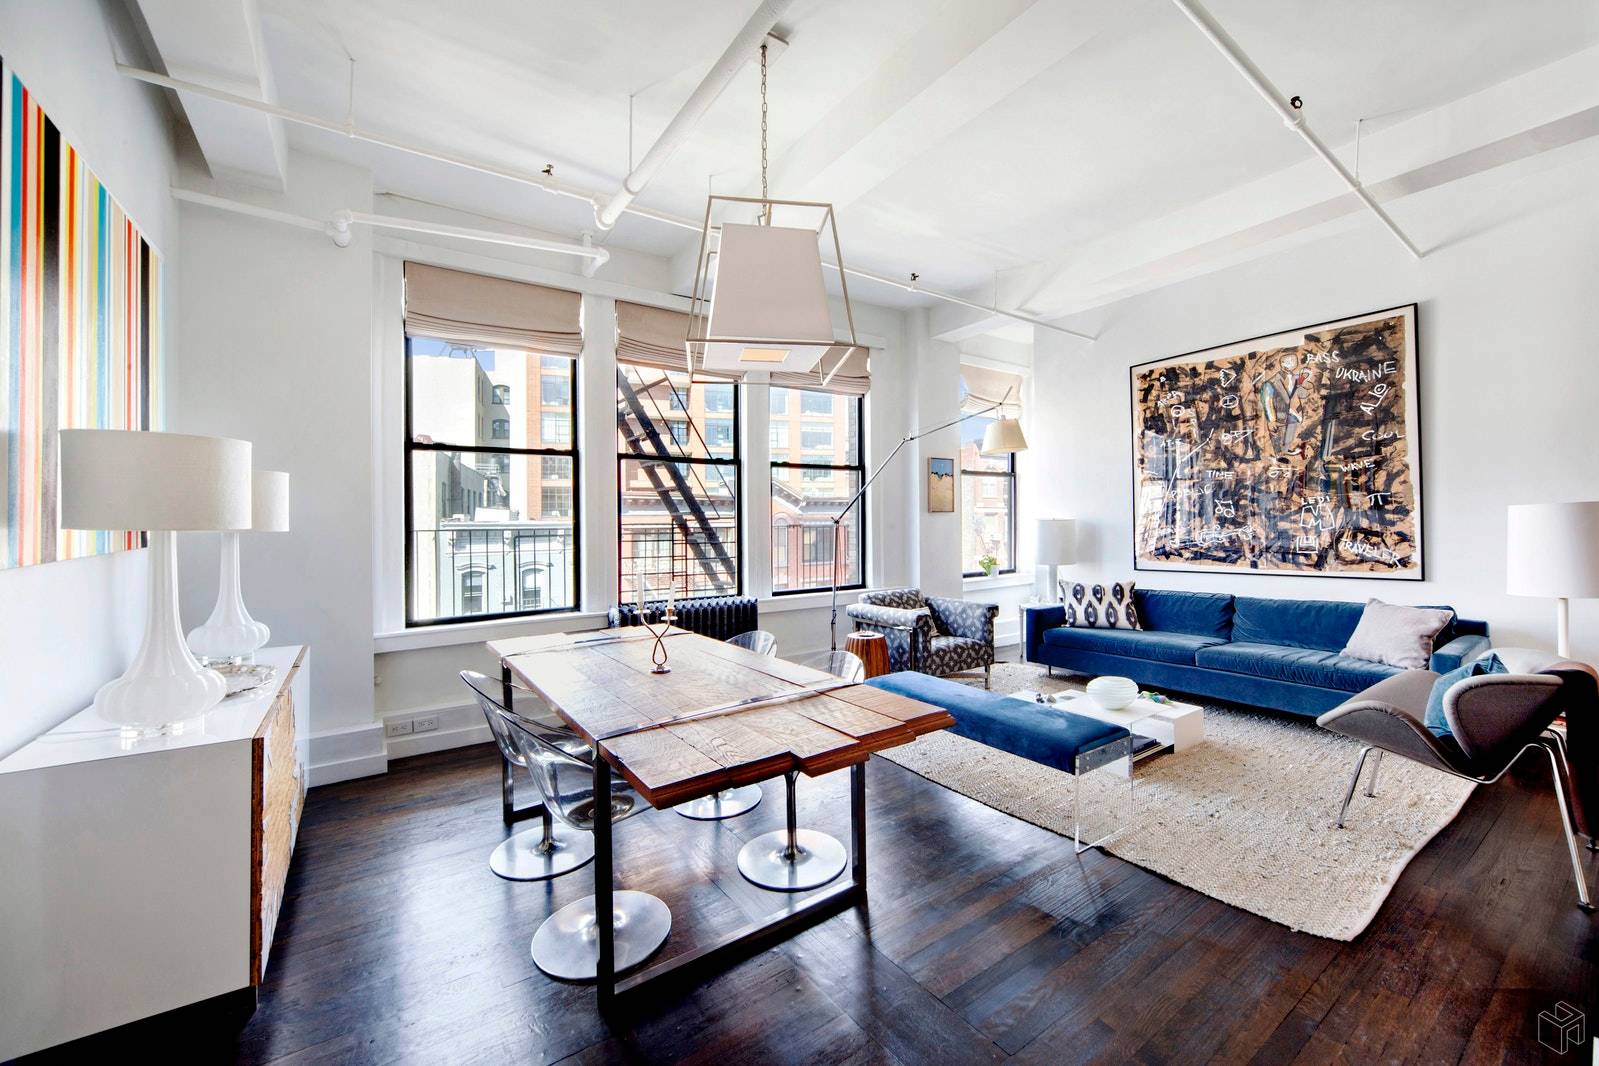 This wide and light filled 1, 700 square foot loft is located right at the crossroads of Soho and Nolita and offers spacious rooms and a sensible split bedroom layout.